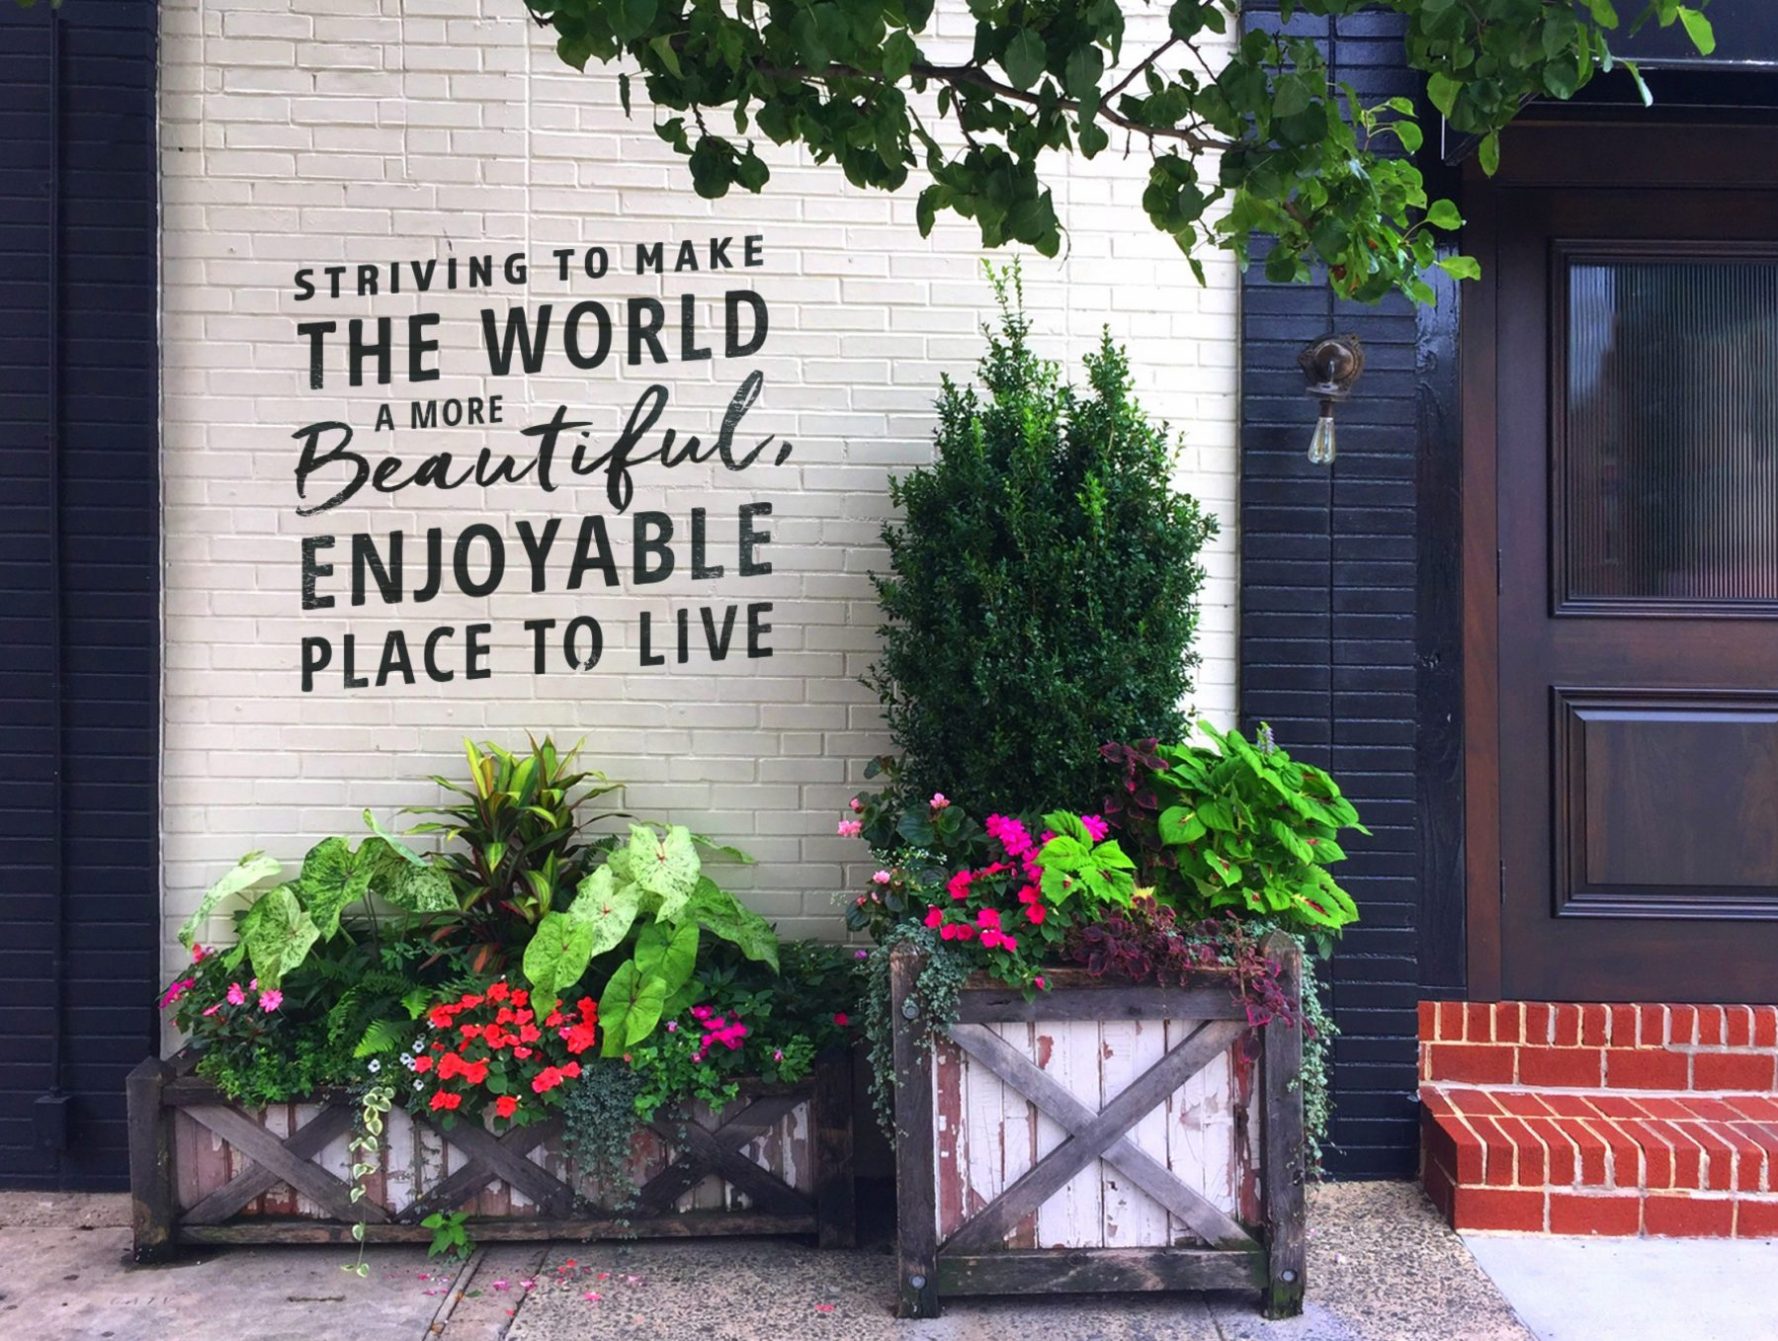 Colorful Summer Planters in front of a wall that says "Striving to Make The World A More Beautiful, Enjoyable Place To Live"